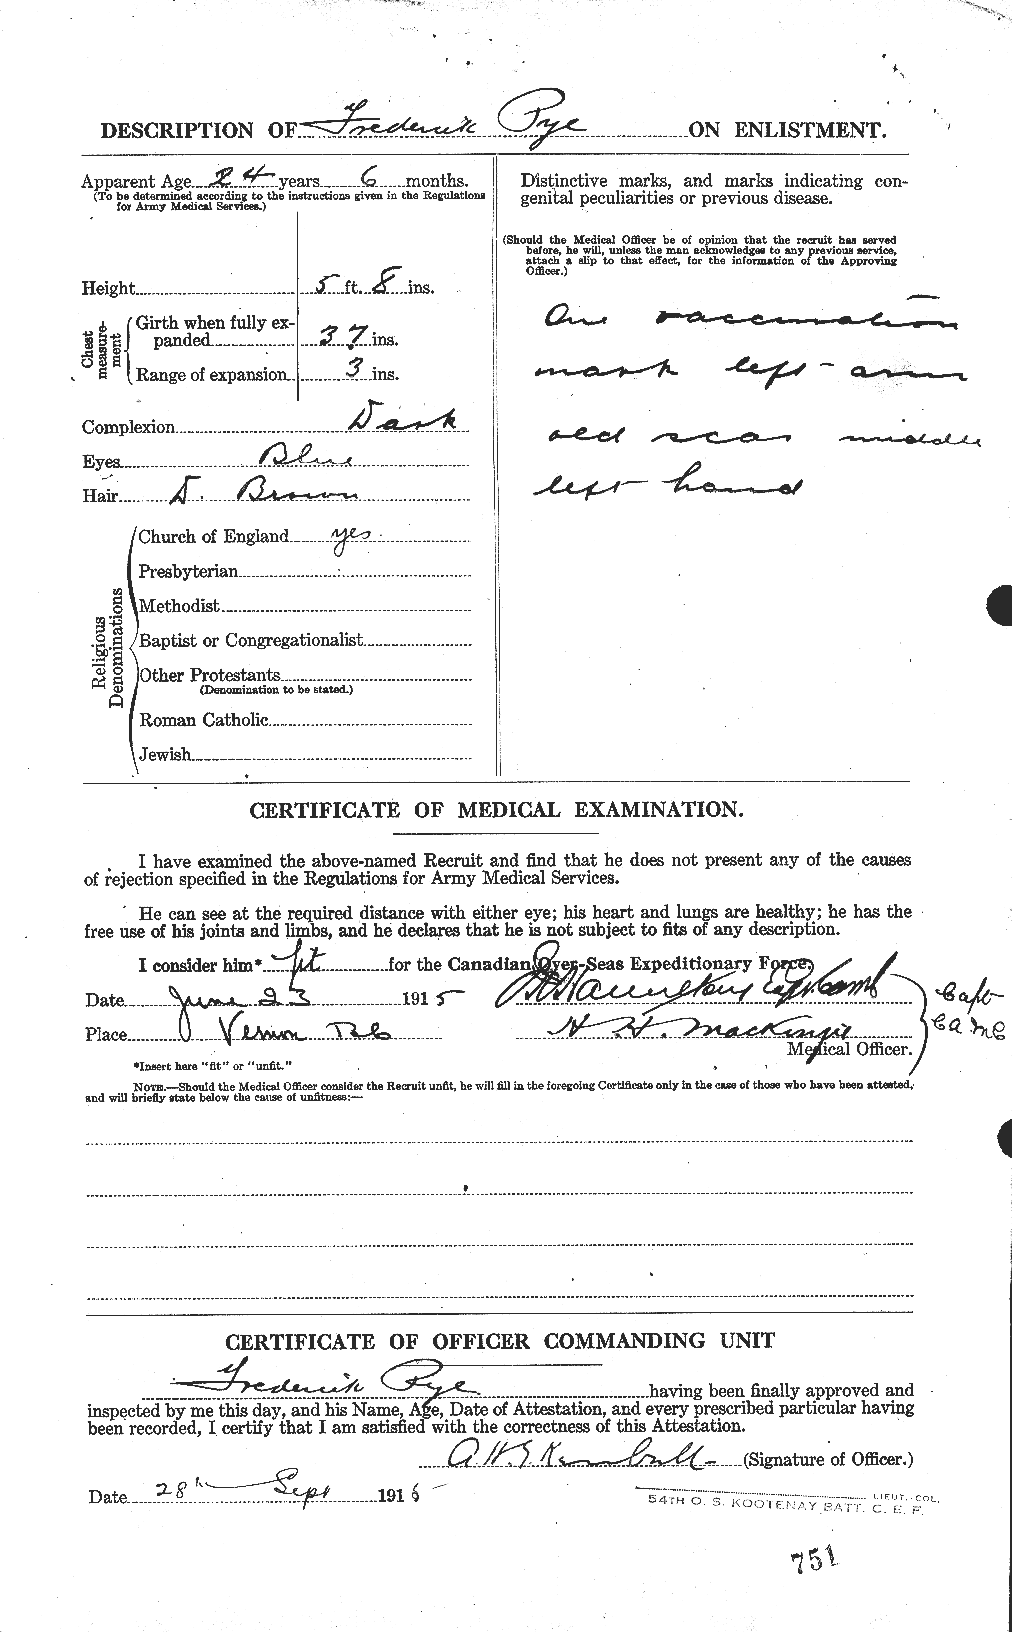 Personnel Records of the First World War - CEF 591843b